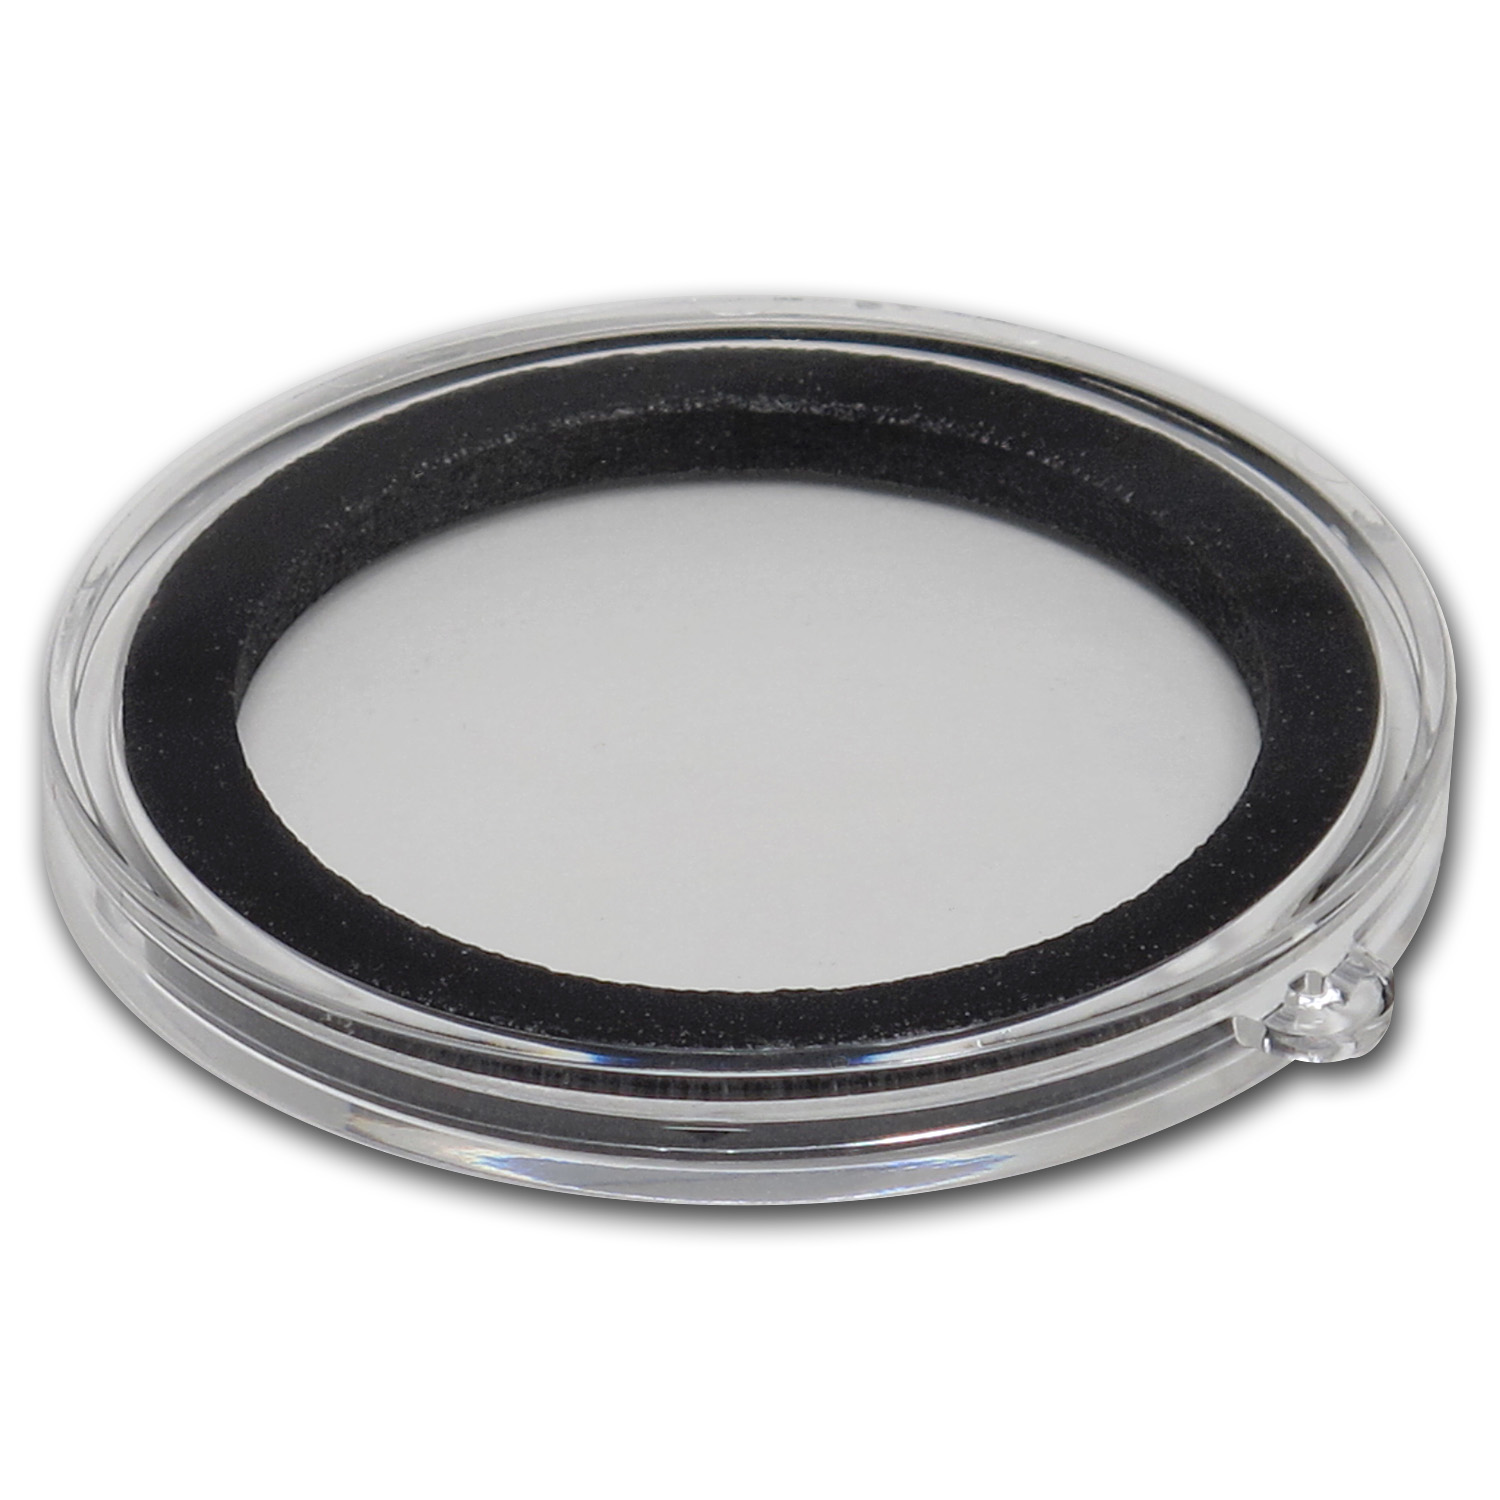 Buy Ornament Capsule for Silver Coins/Rounds - 38 mm (Black Ring) - Click Image to Close